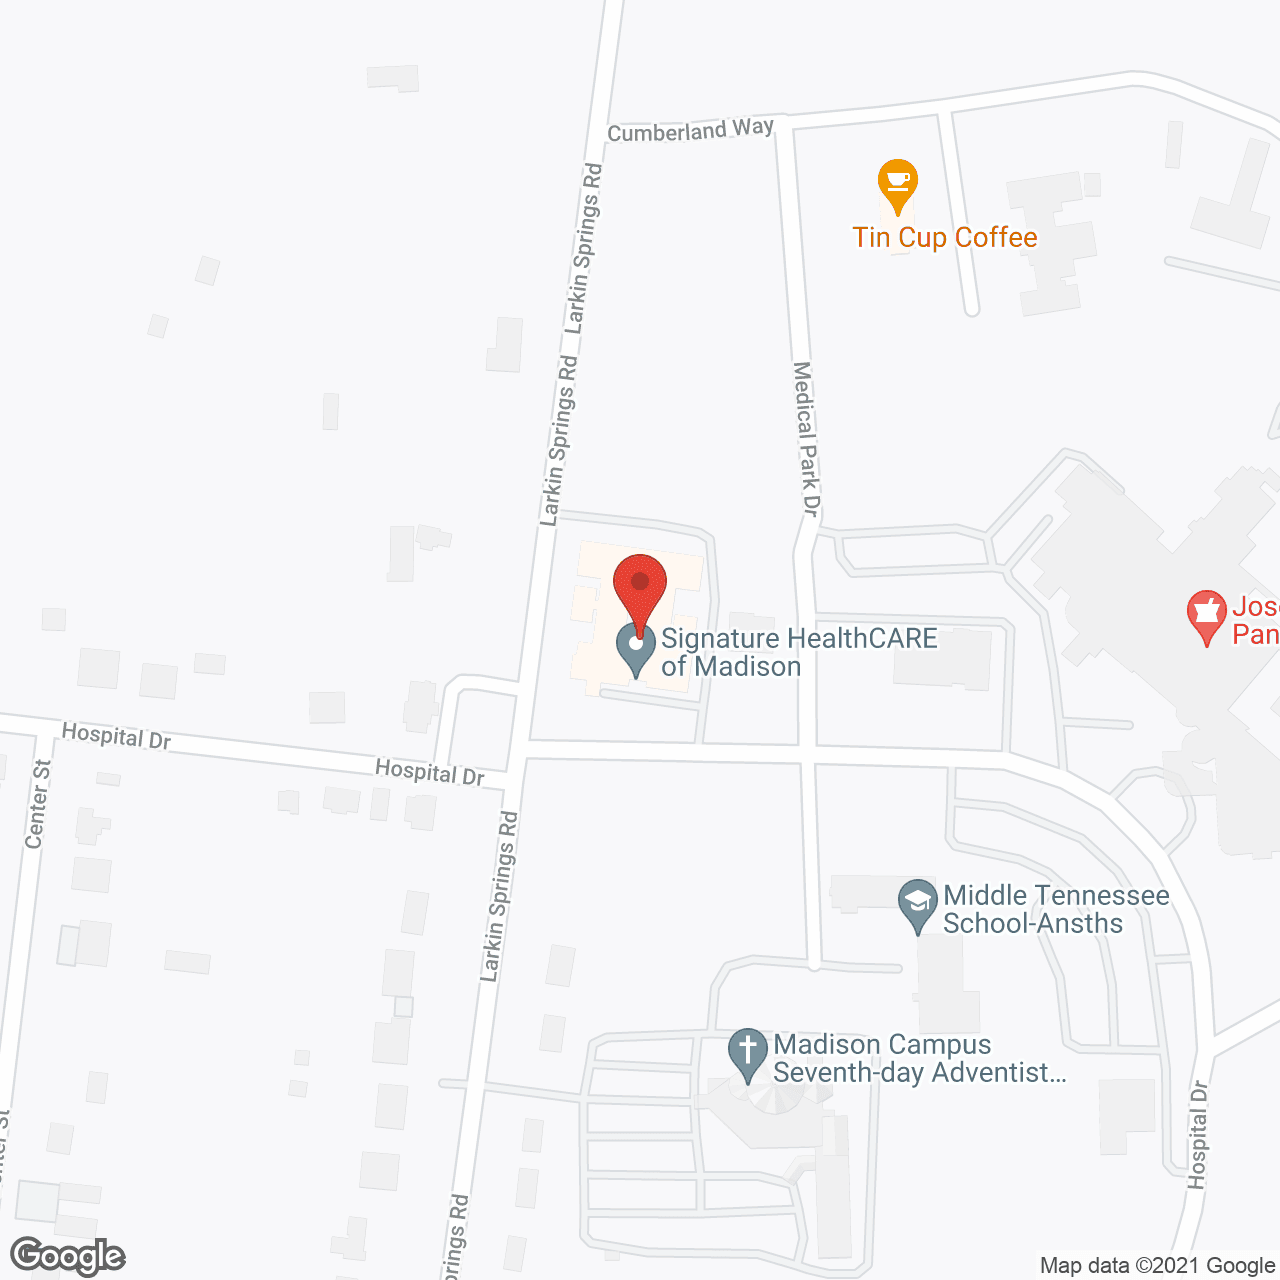 Signature Healthcare of Madison in google map